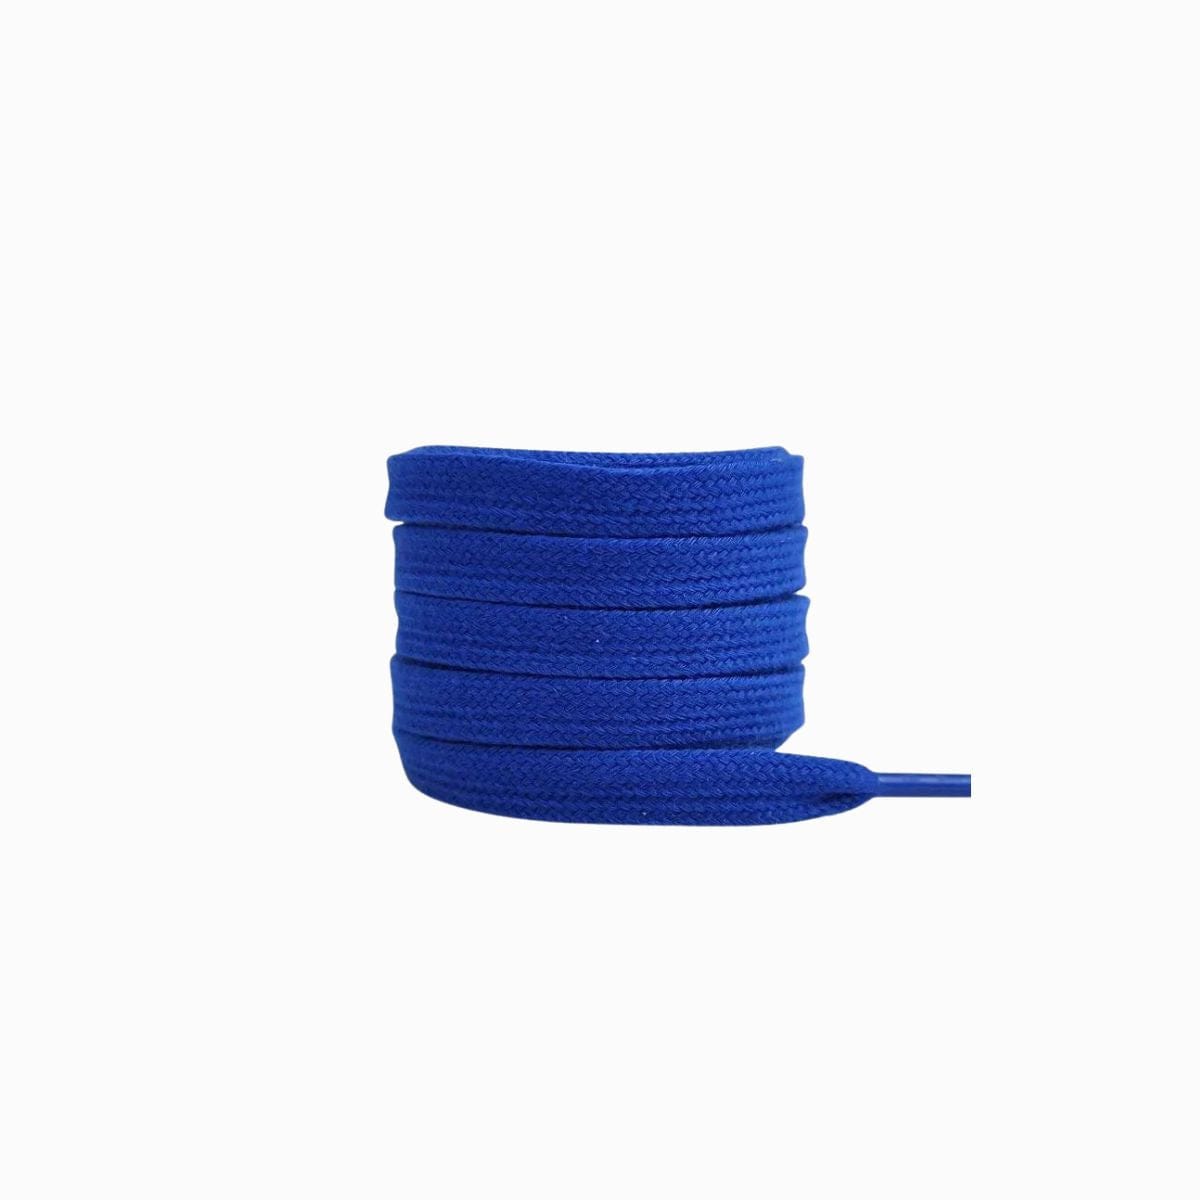 Royal Blue Replacement Adidas Shoe Laces for Adidas Samba OG Sneakers by Kicks Shoelaces